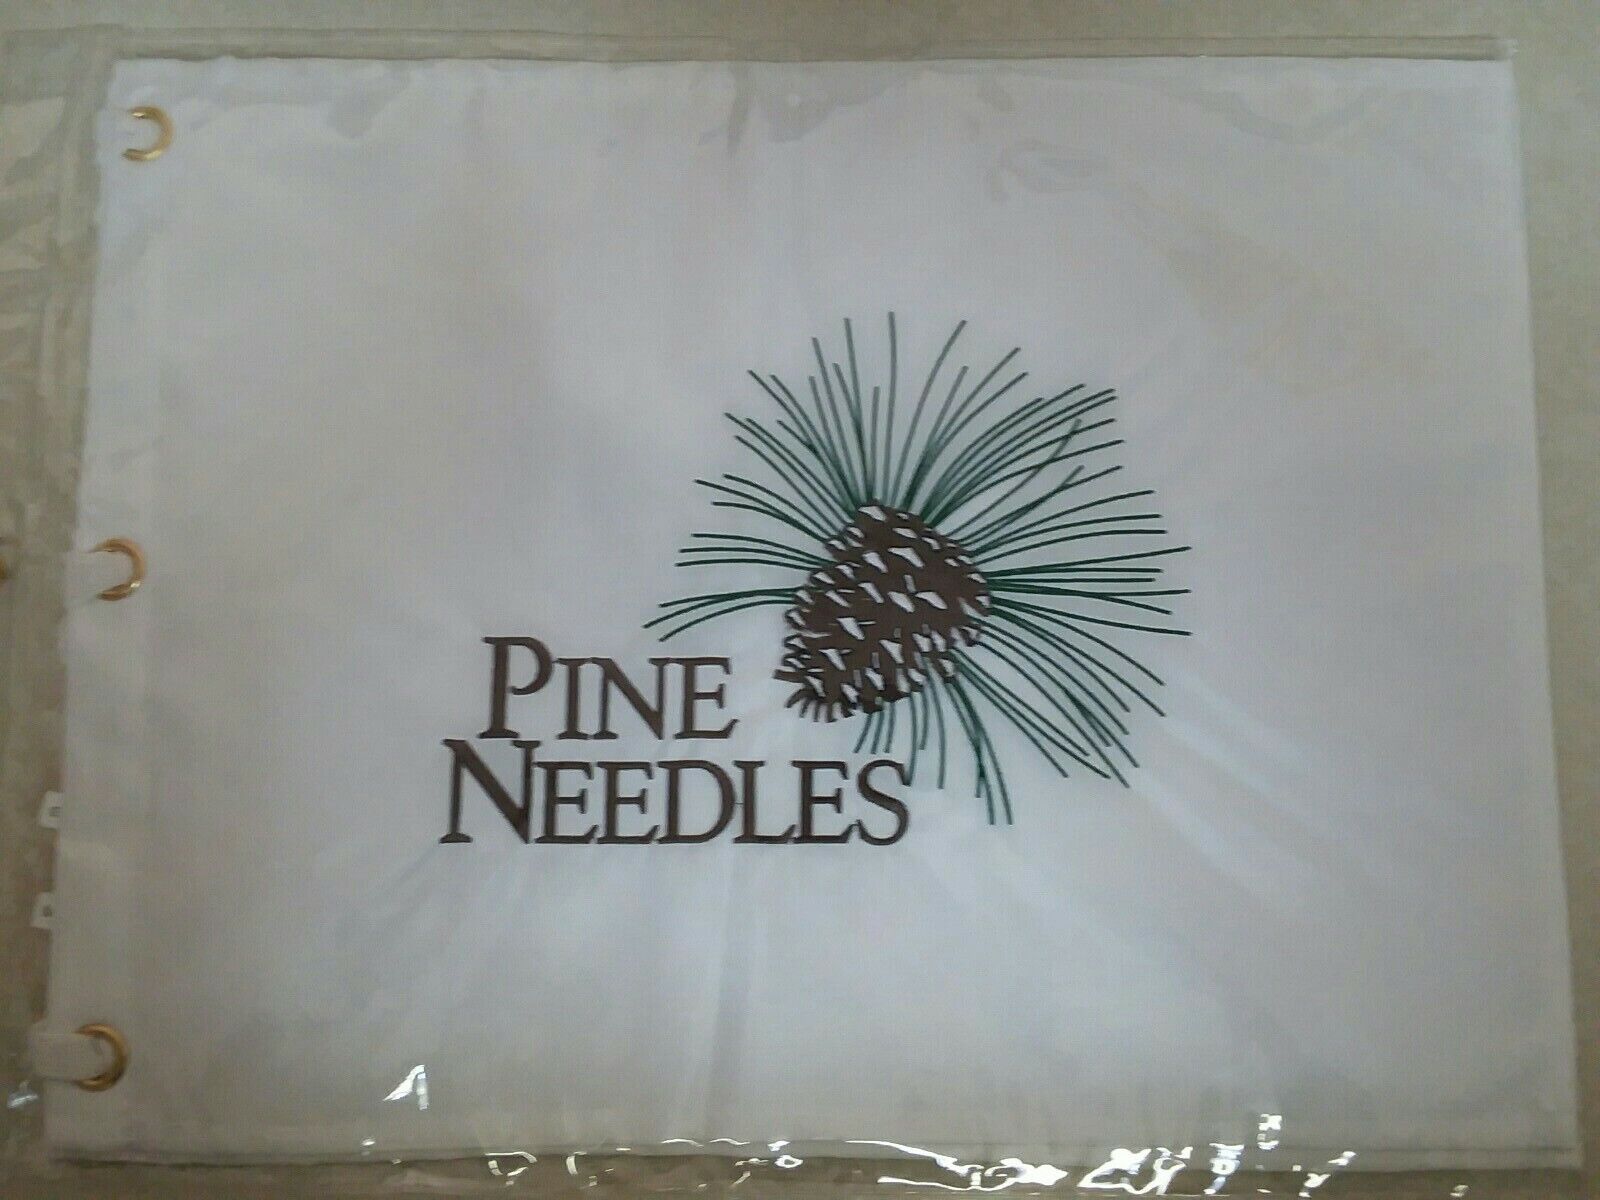 Pine Needles Don't miss 5% OFF the campaign Golf Club North Carolina Donald 1921 pin Ross flag